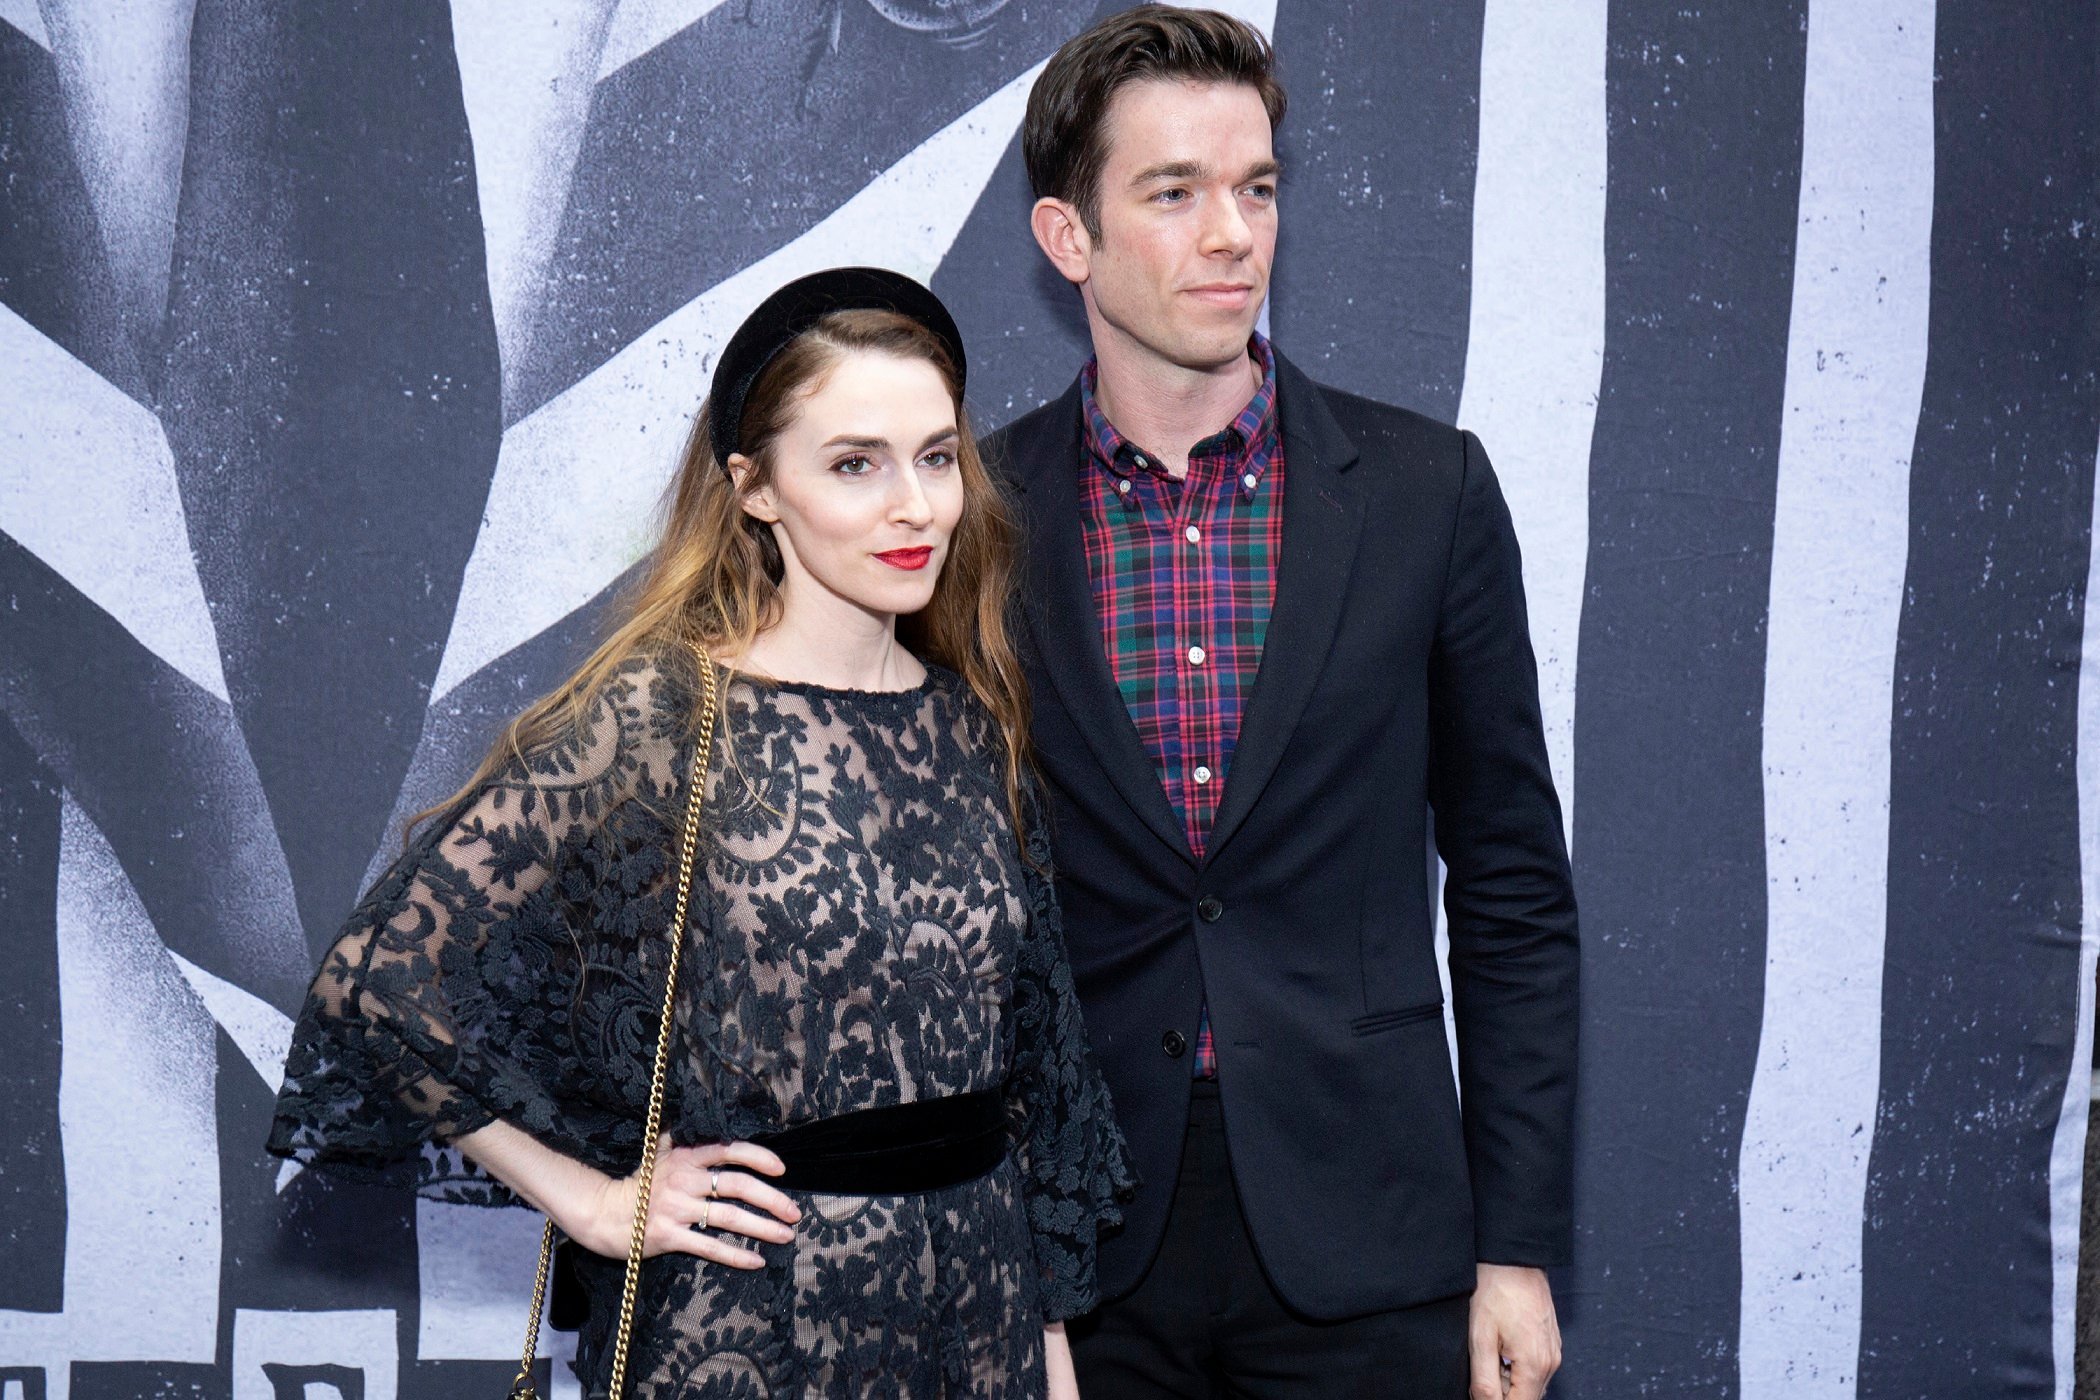 Annamarie Tendler and John Mulaney pose for a photo together outside of the Winter Garden Theatre on April 2019